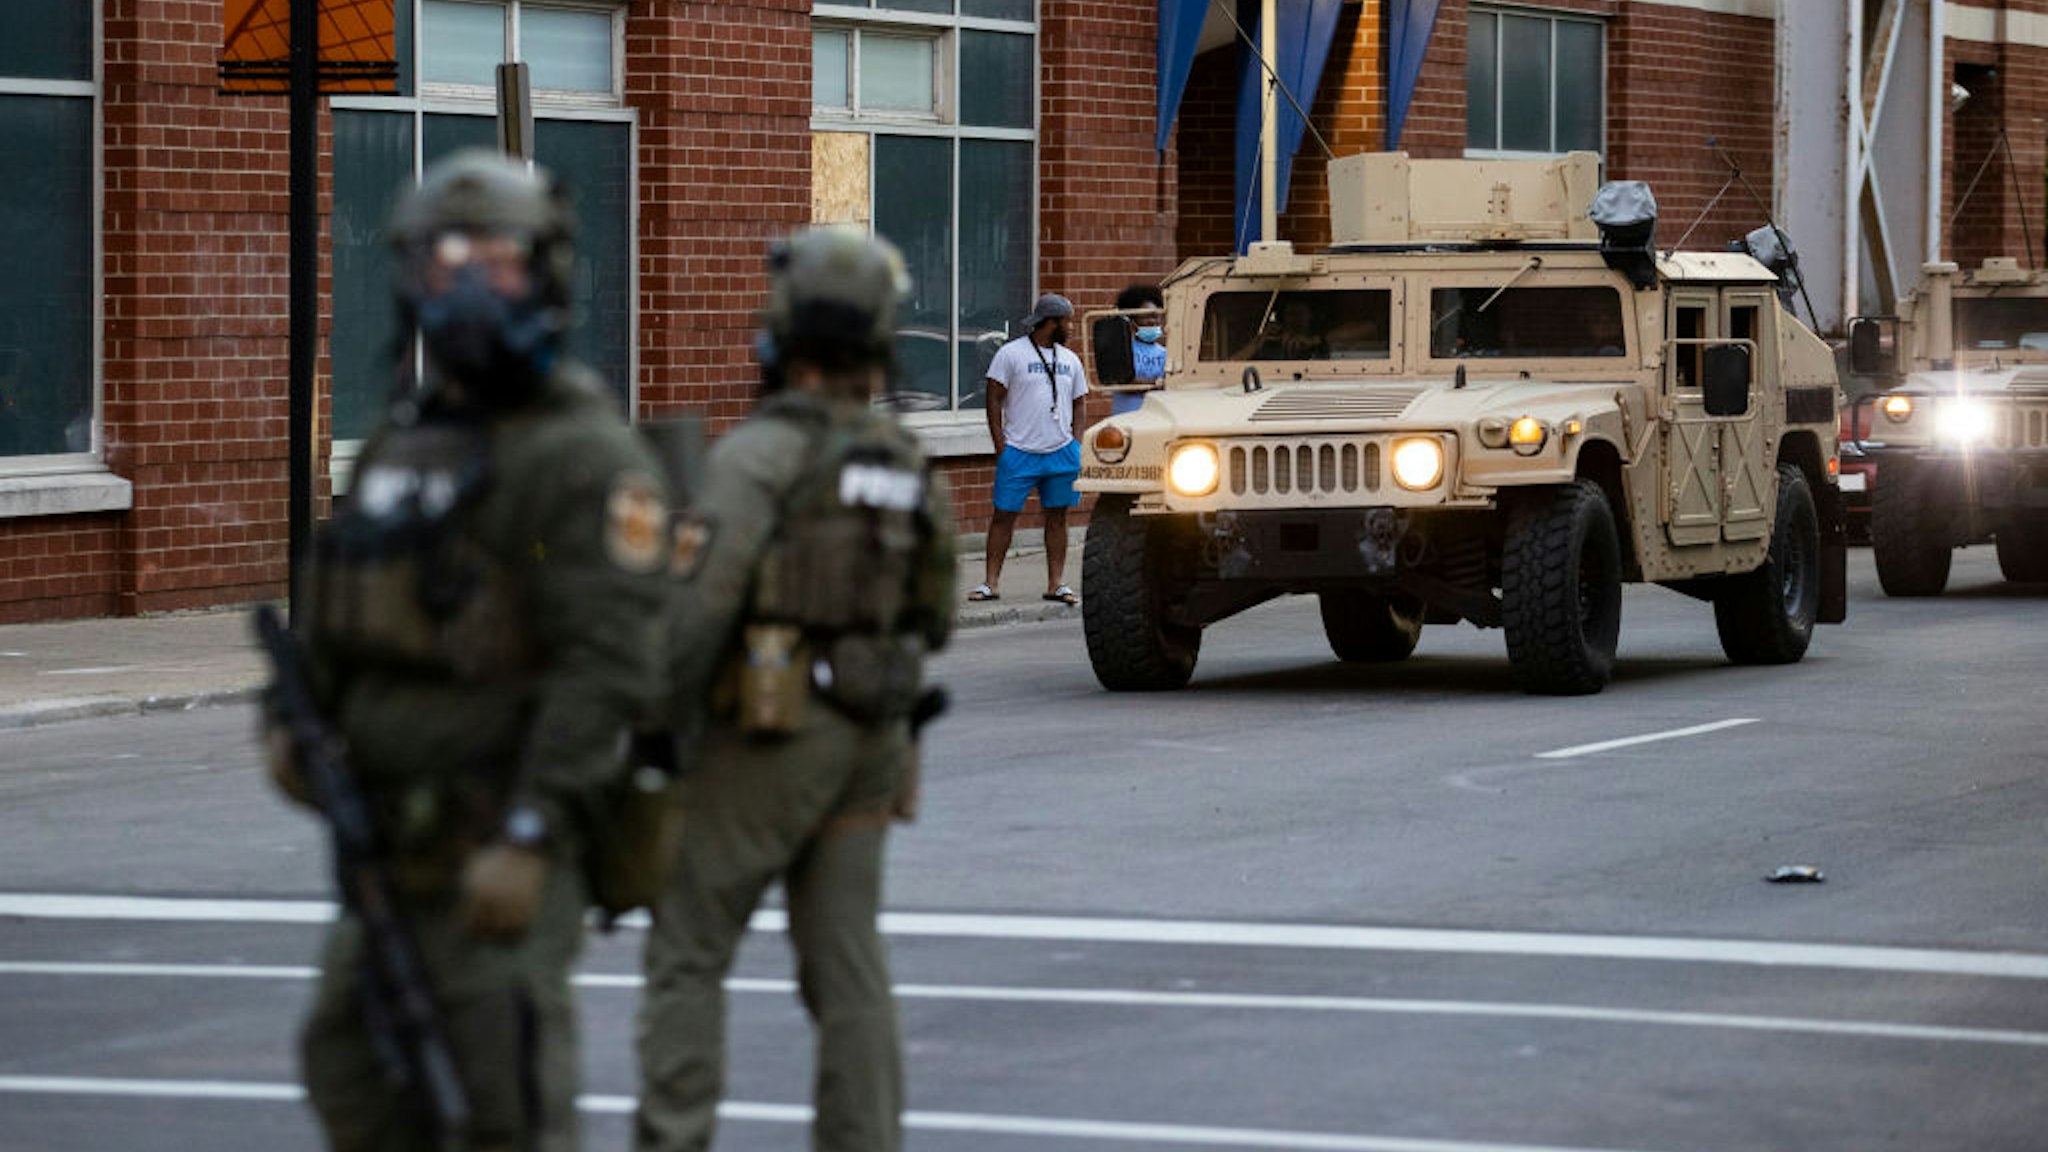 LOUISVILLE, KY - MAY 30: National Guard vehicles drive into downtown behind police officers in riot gear as protests occur on May 30, 2020 in Louisville, Kentucky. Protests have erupted after recent police-related incidents resulting in the deaths of African-Americans Breonna Taylor in Louisville and George Floyd in Minneapolis, Minnesota. (Photo by Brett Carlsen/Getty Images)